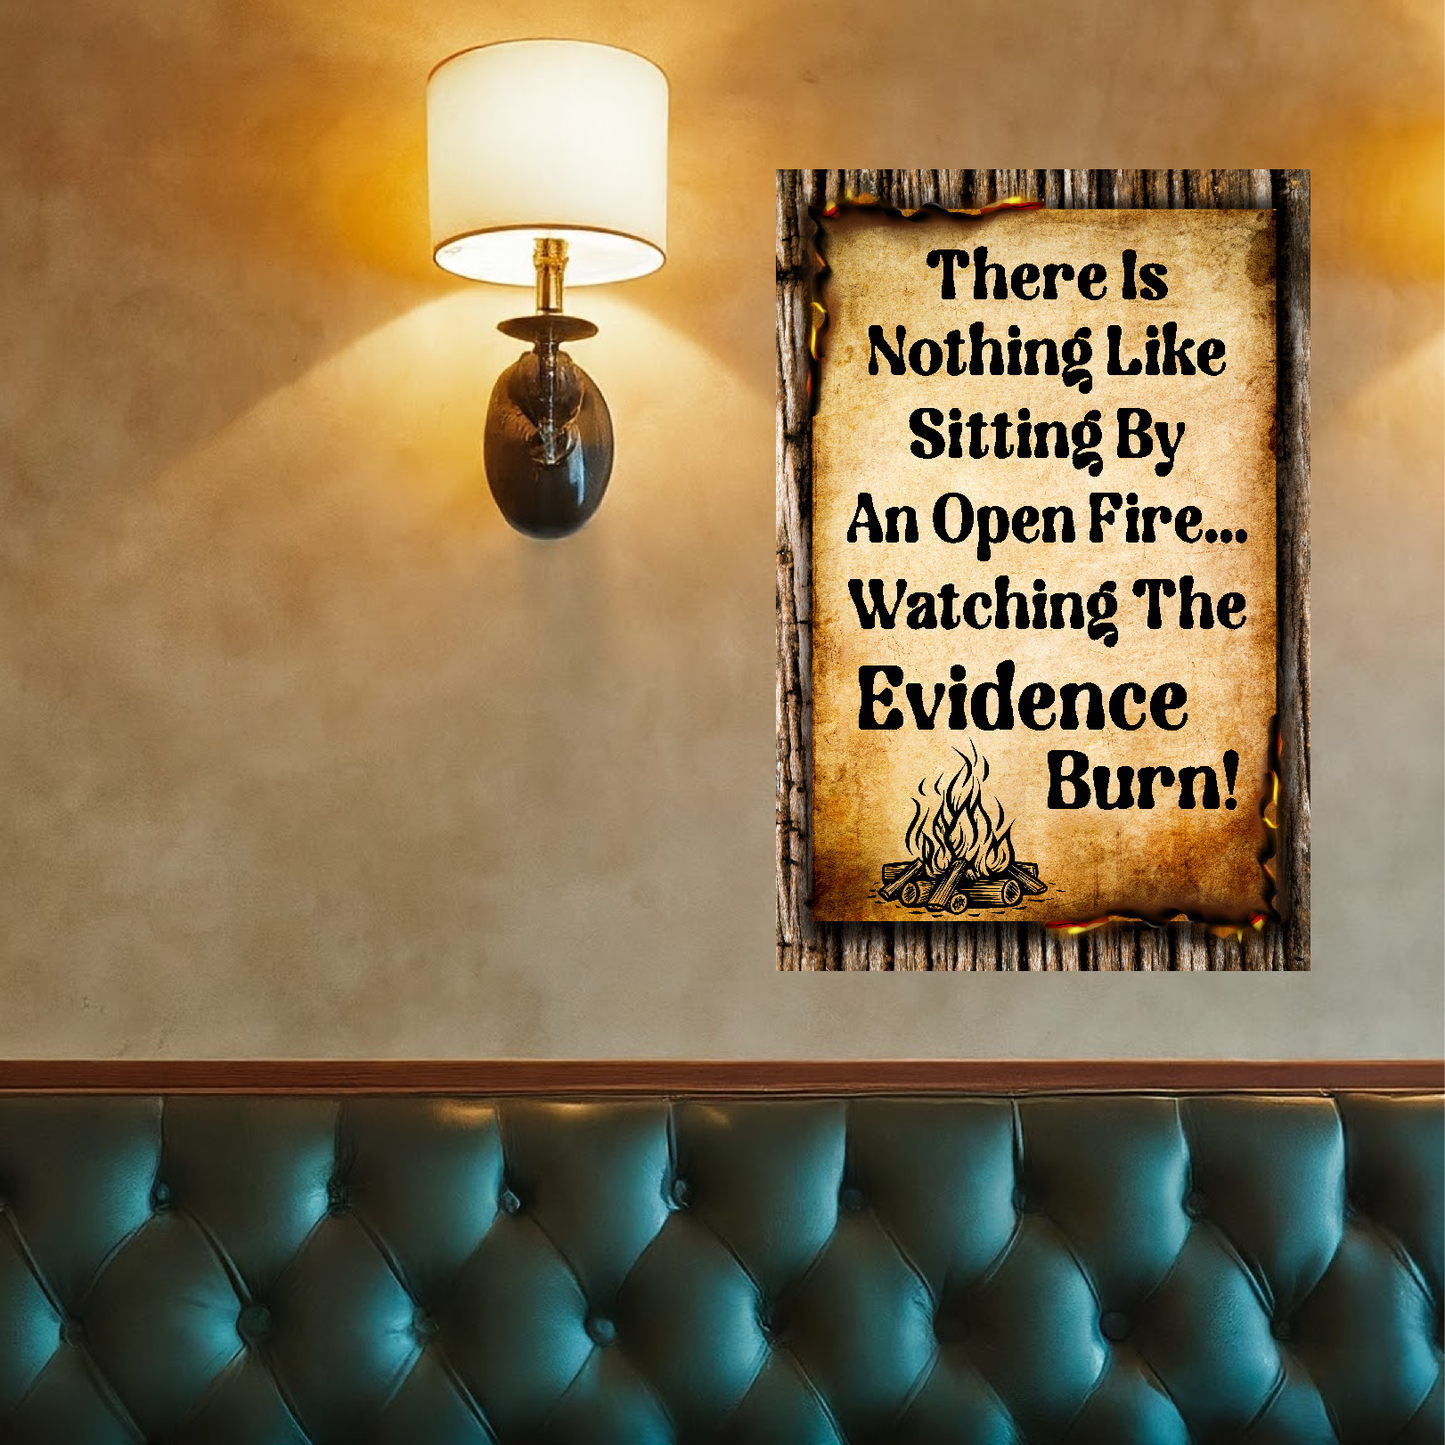 There Is Nothing Like Sitting By An Open Fire... Watching The Evidence Burn - 12" x 18" Vintage Metal Sign